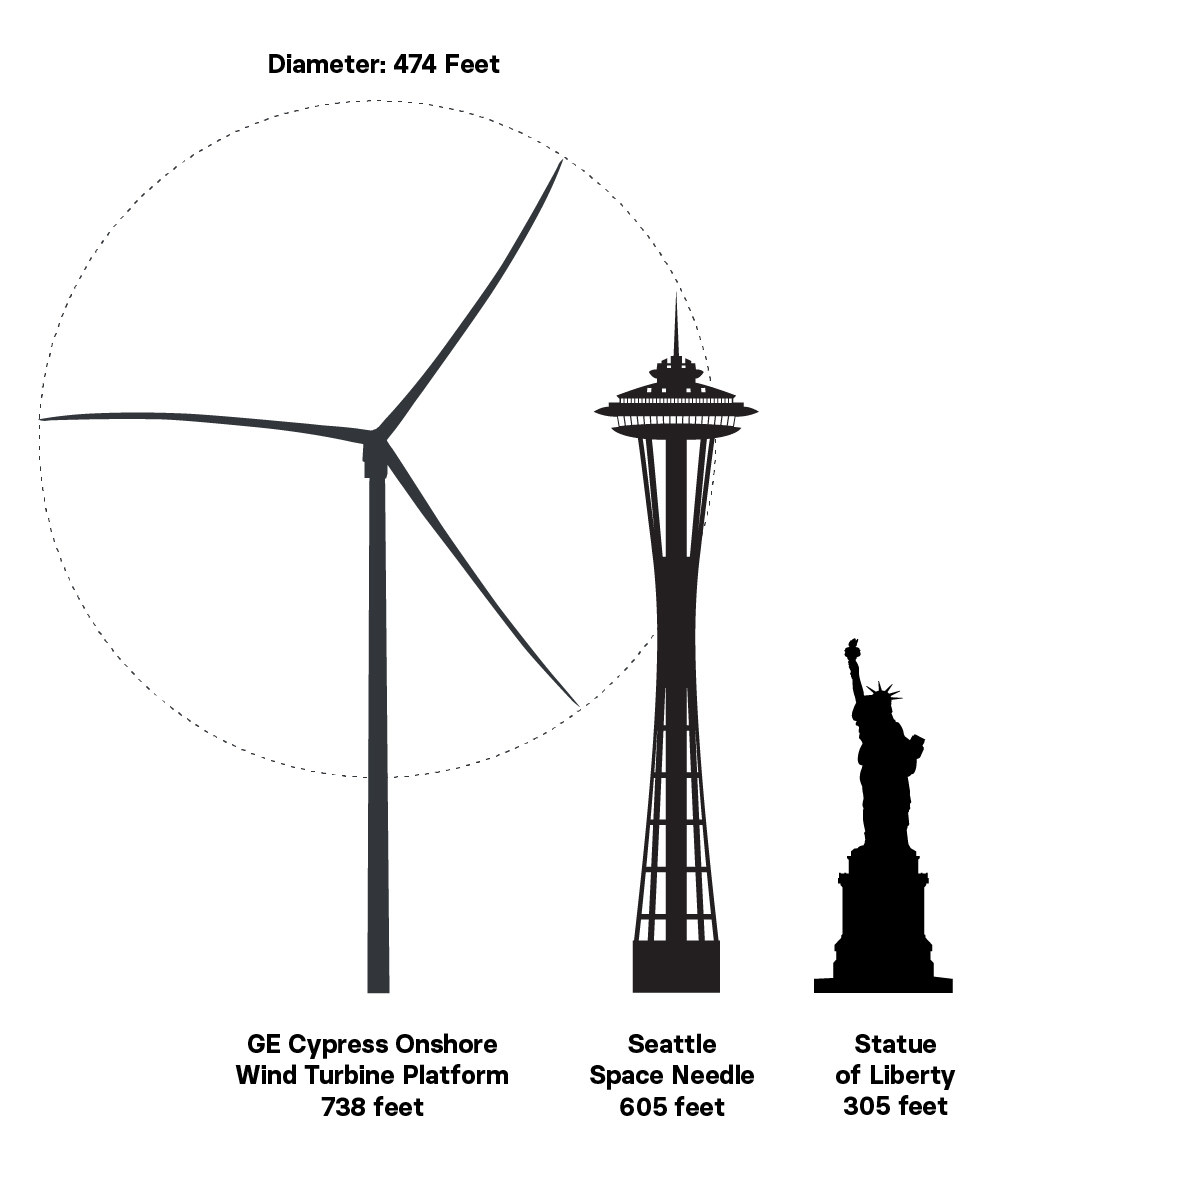 The height and diameter of a wind turbine (738 feet tall, and a diameter of 474 feet) compared to the heights of Seattle&#x27;s Space Needle (605 feet) and the Statue of Liberty (305 feet)